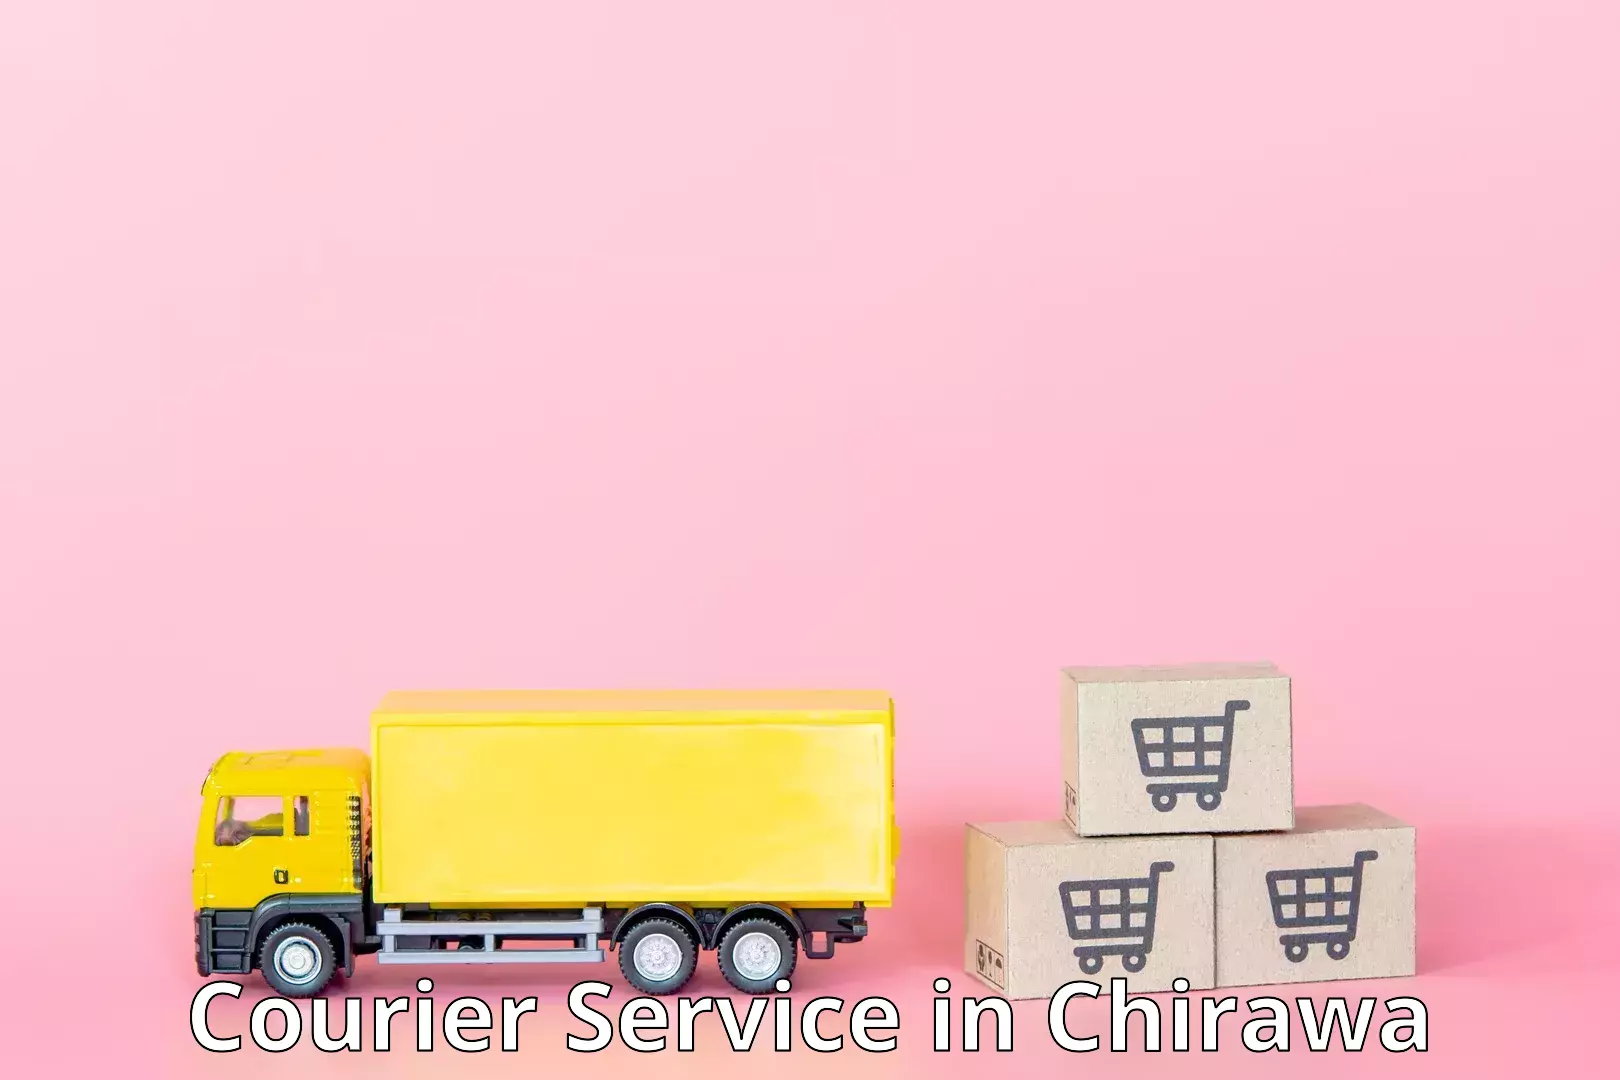 24/7 courier service in Chirawa